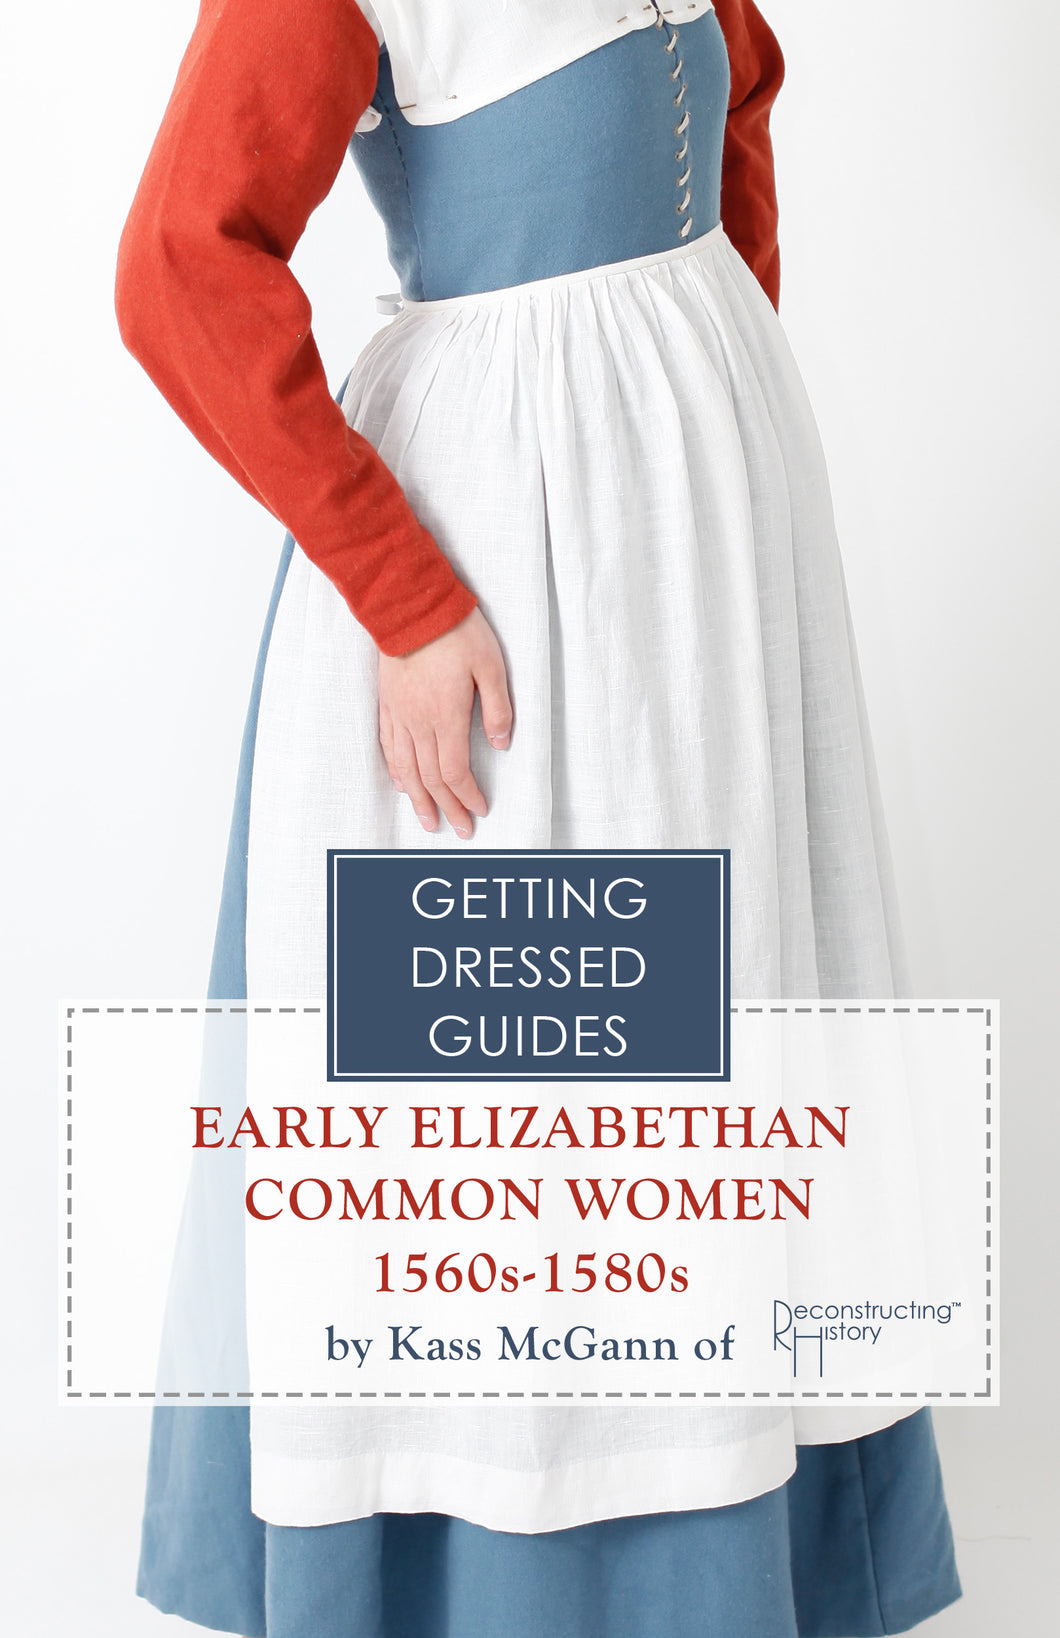 16th century Early Elizabethan Common Women's Getting Dressed Guide